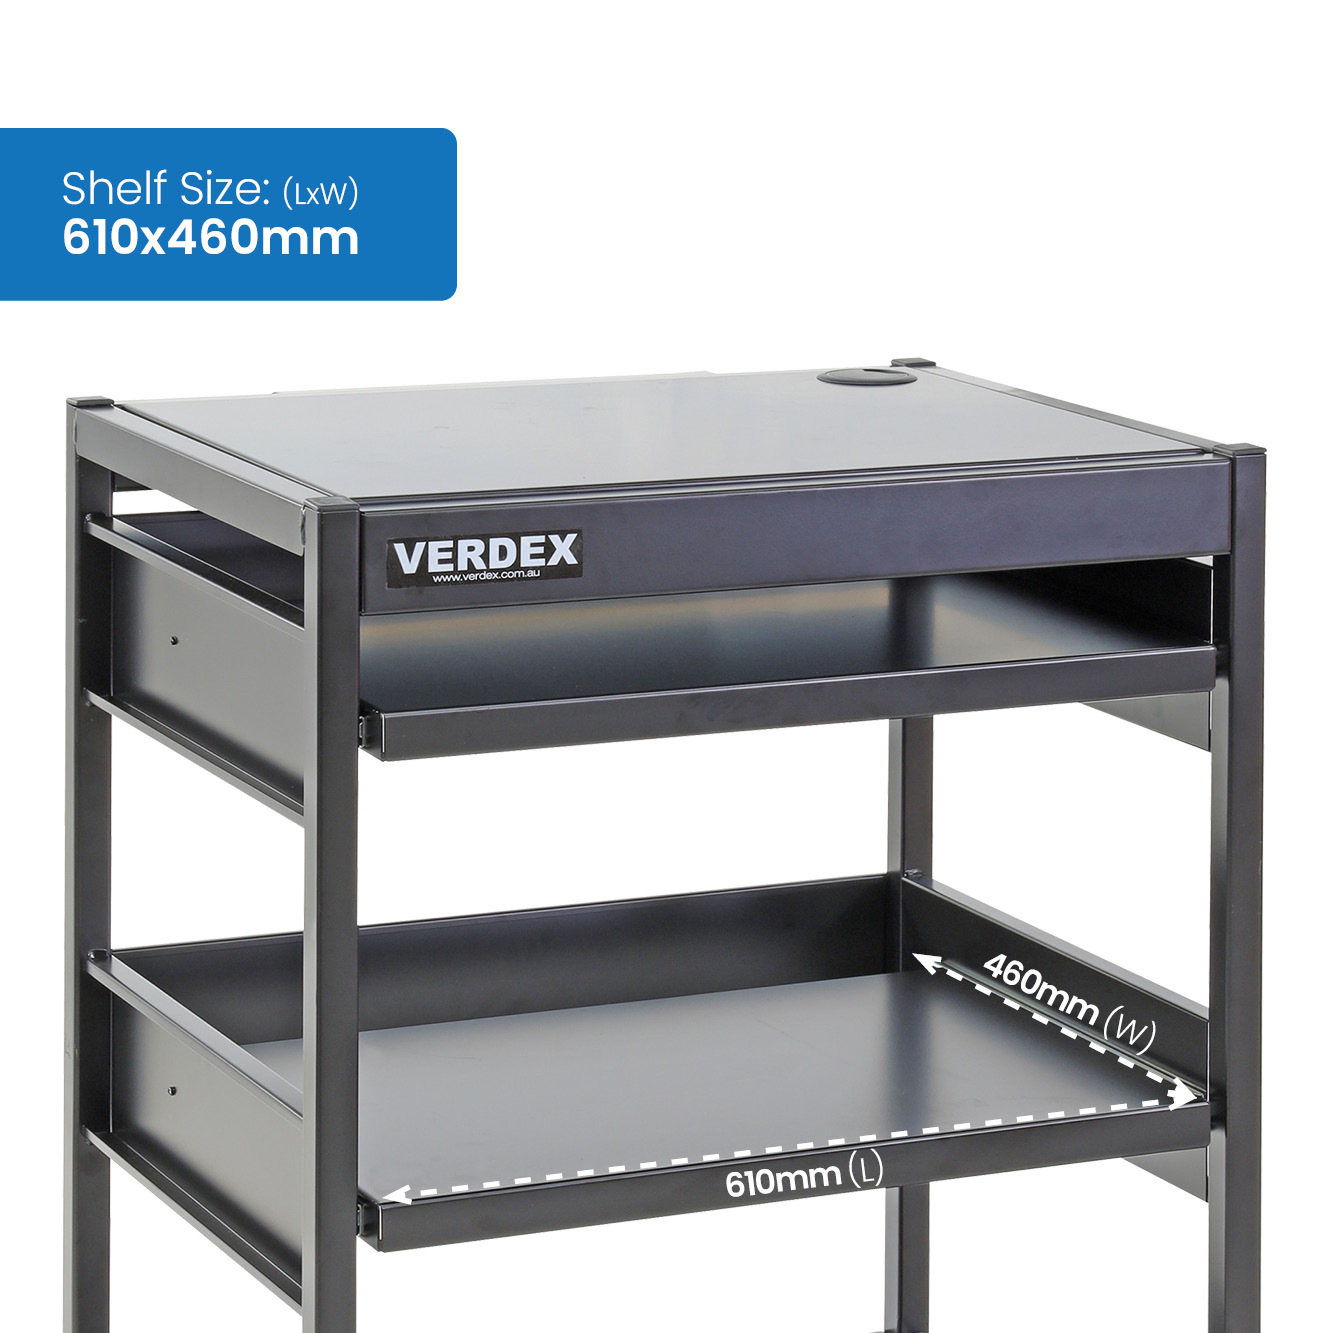 3 Tier Steel Computer Cart with Slide Out Shelf